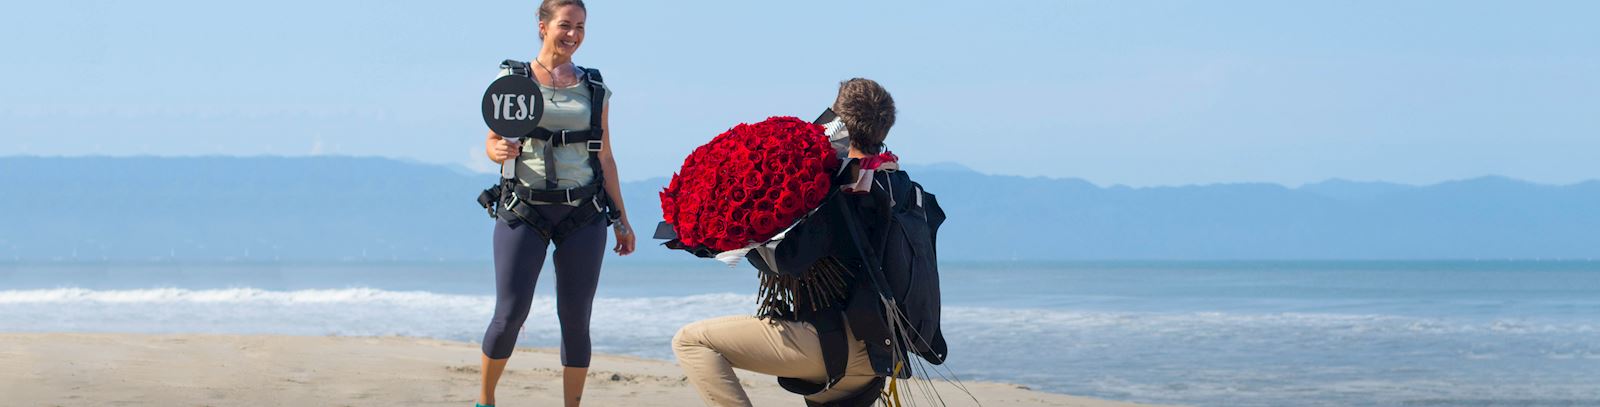 Over The Top Engagement - Grand Velas Riviera Nayarit